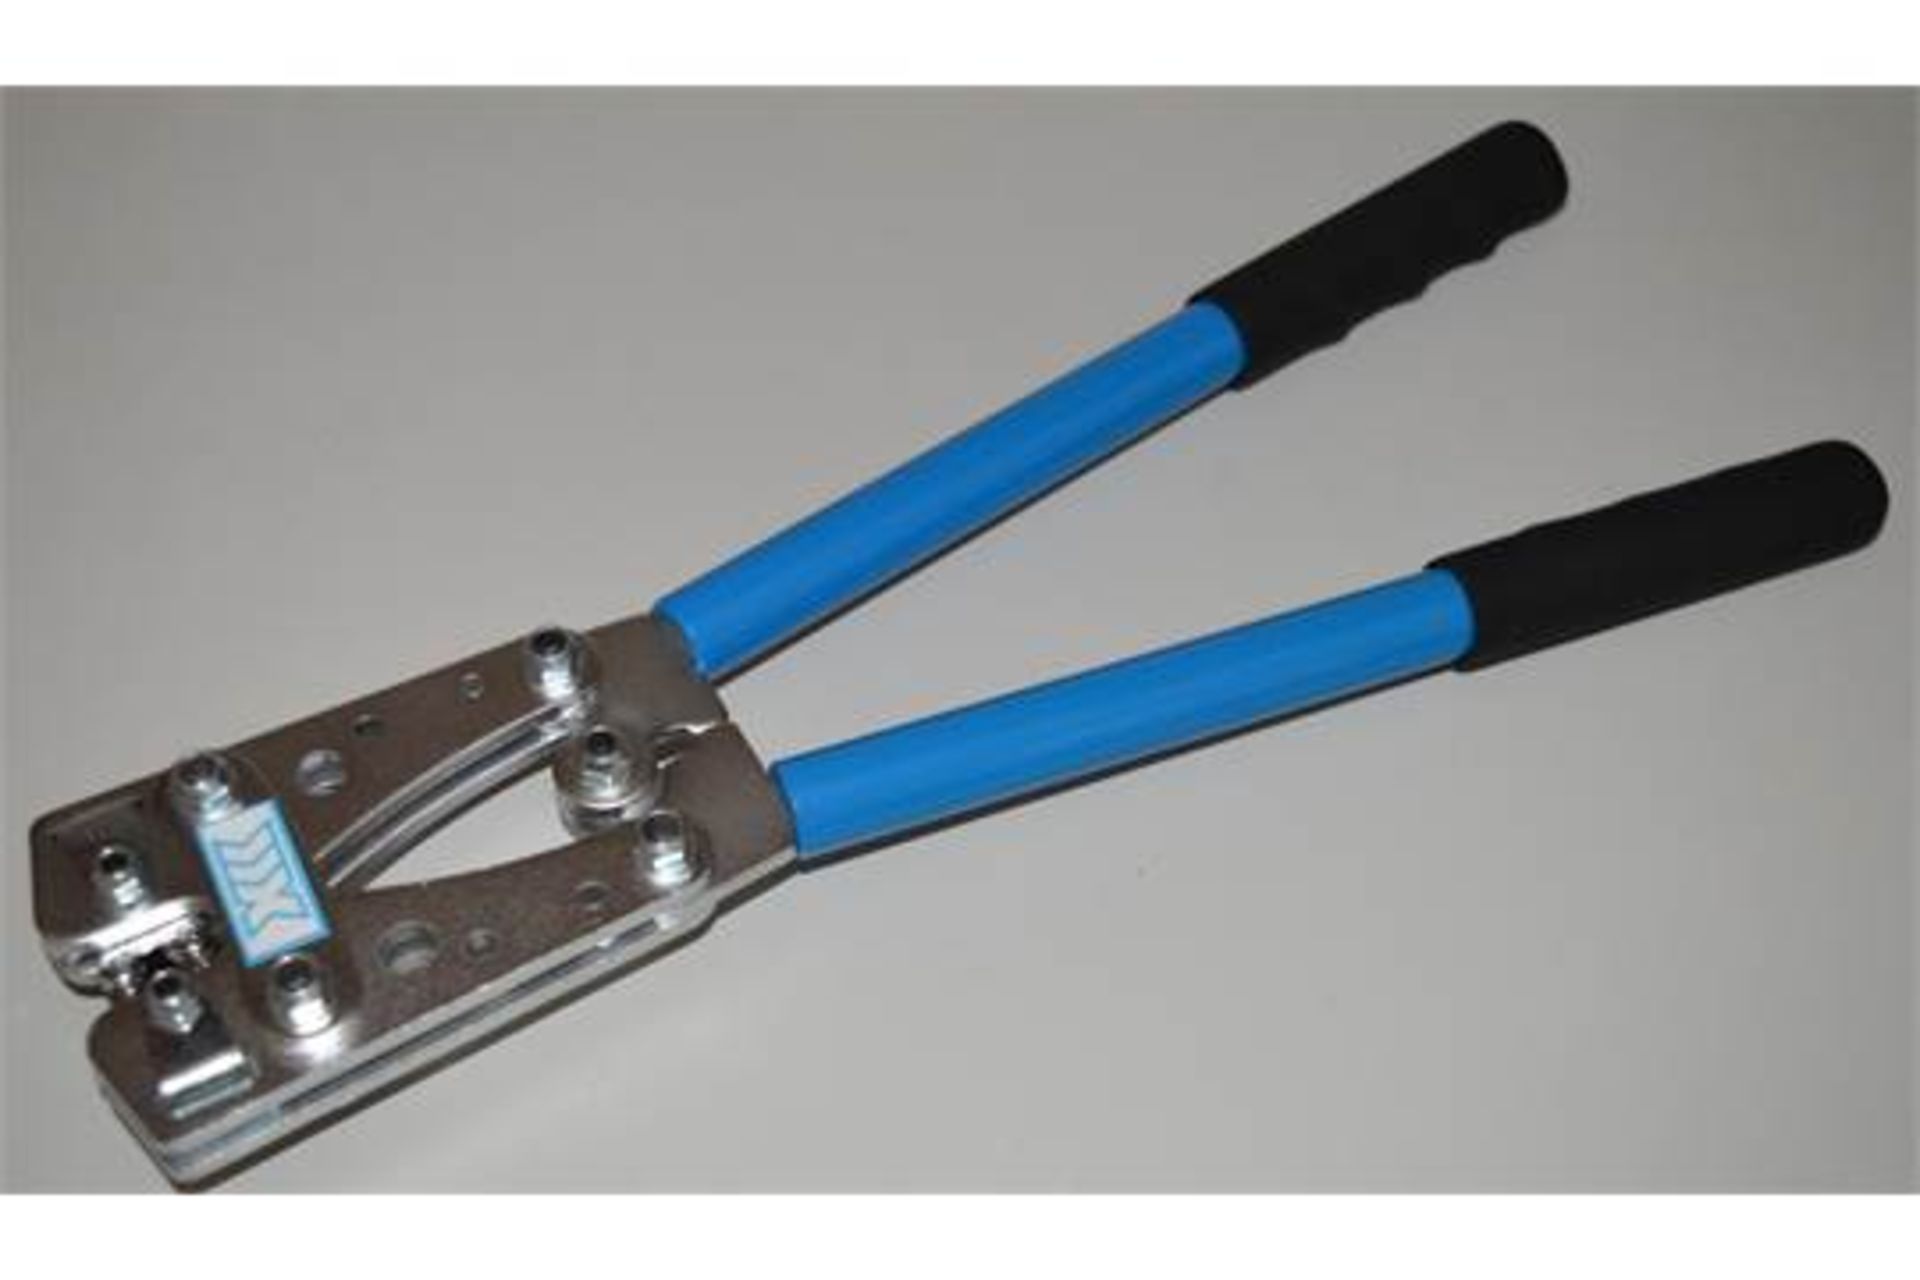 1 x HD Copper Tube Terminal Crimp Tool With Adjustable Hex - 38cm Length - XXX Branded - New and - Image 8 of 10